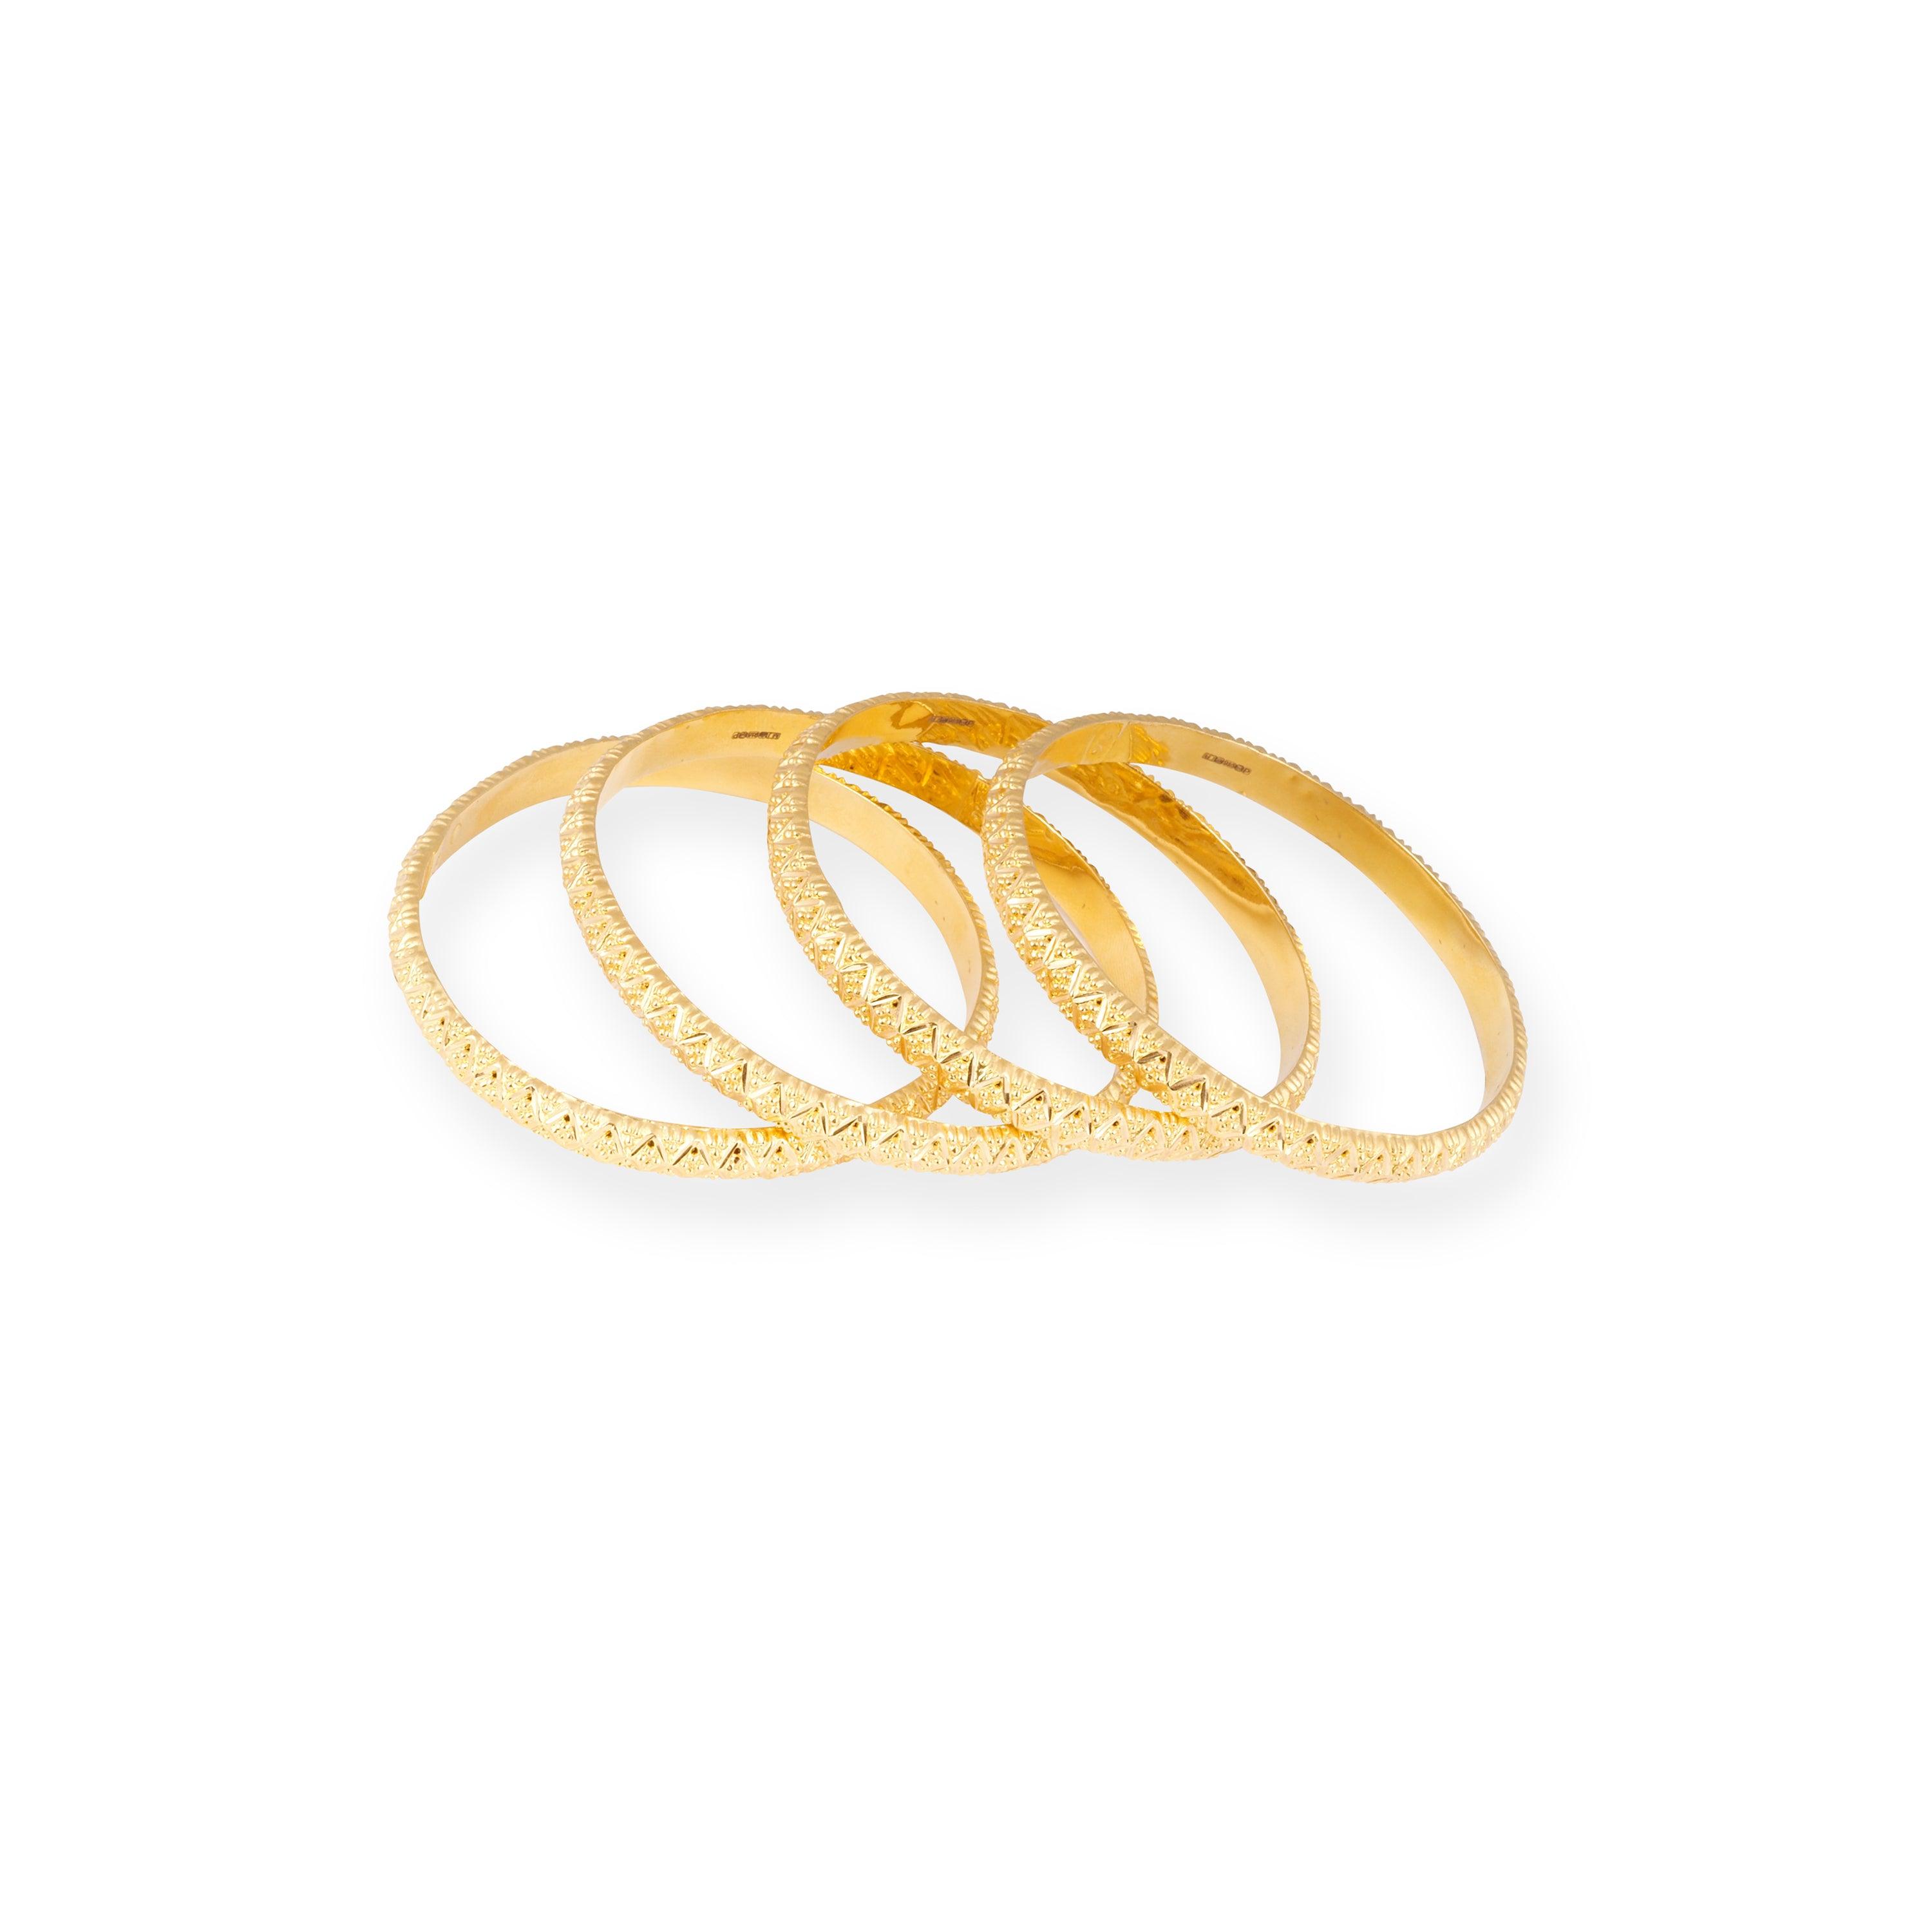 Set of Four 22ct Gold Bangles with Diamond Cut Beads and Filigree Work B-8591 - Minar Jewellers